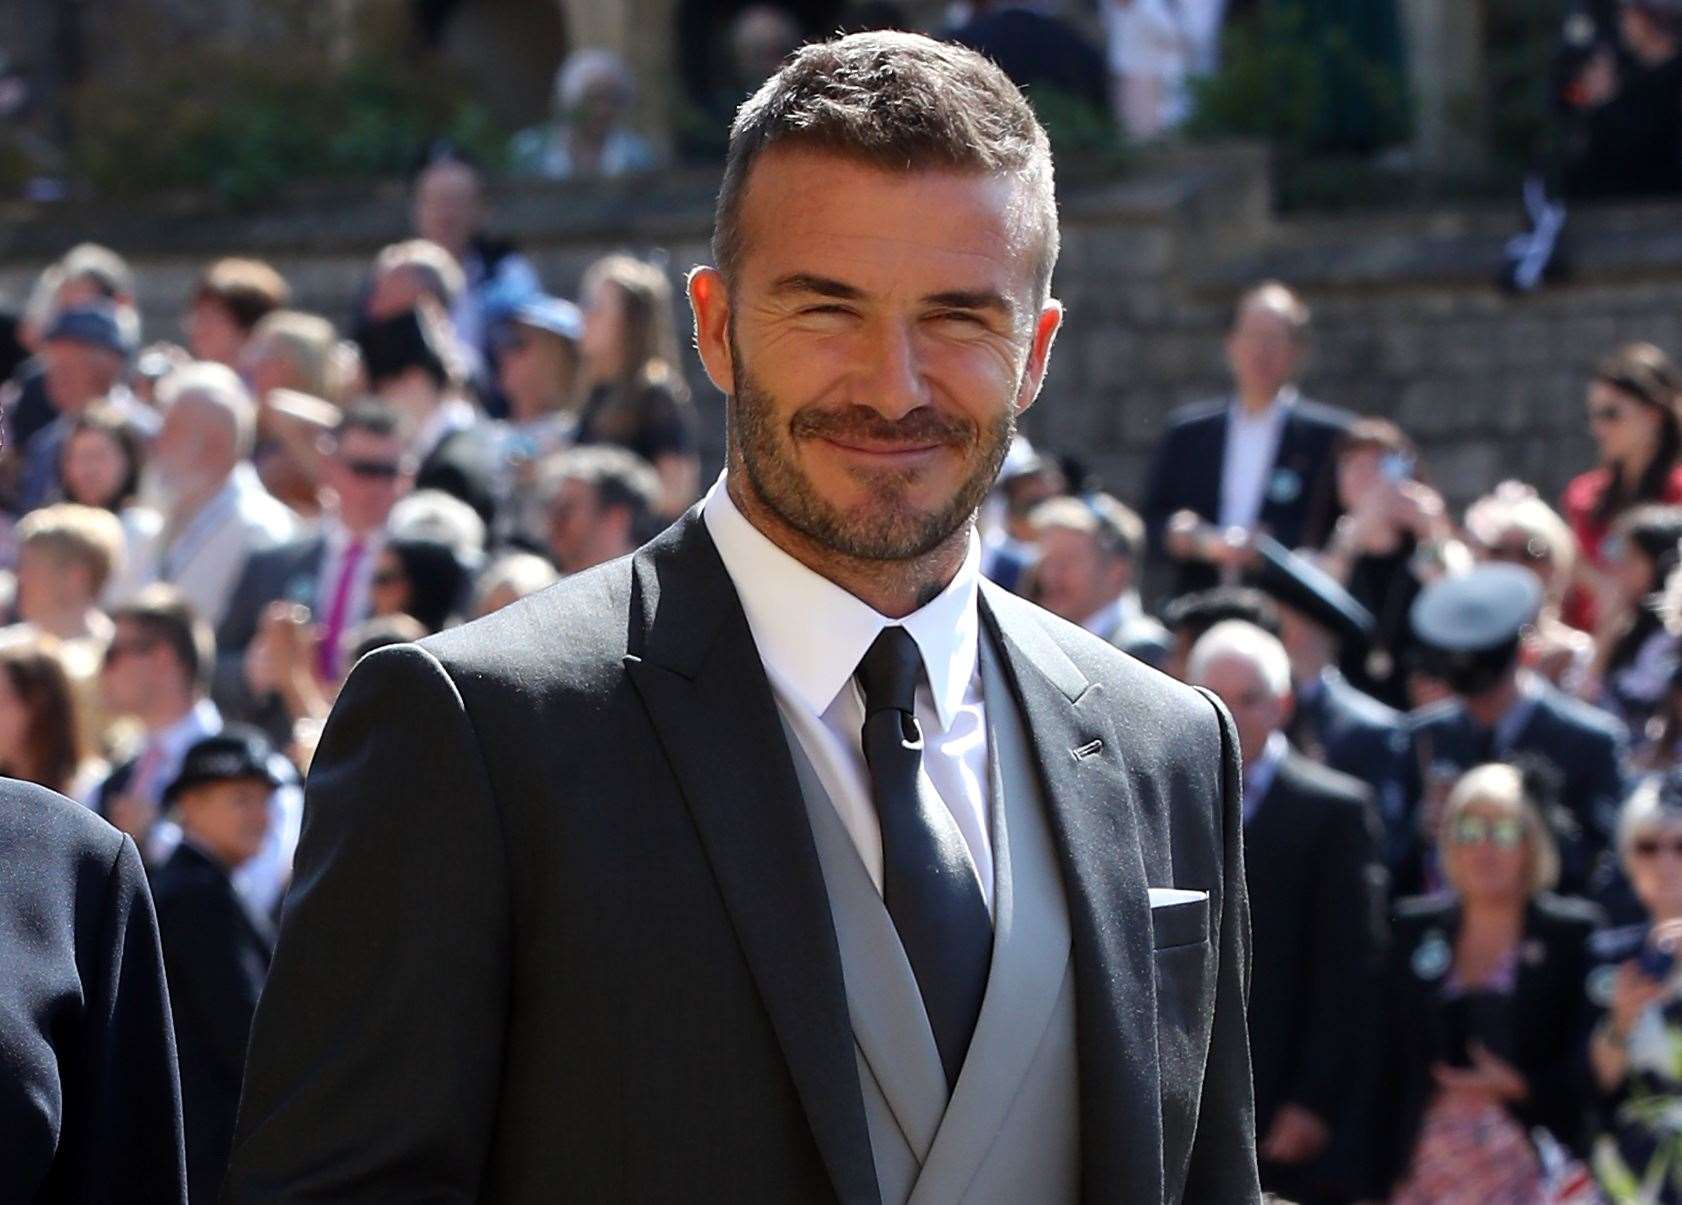 David Beckham, pictured here at Prince Harry's wedding, is among the celebrities due to appear in the Friends reunion episode. Picture credit: Chris Radburn/PA Wire